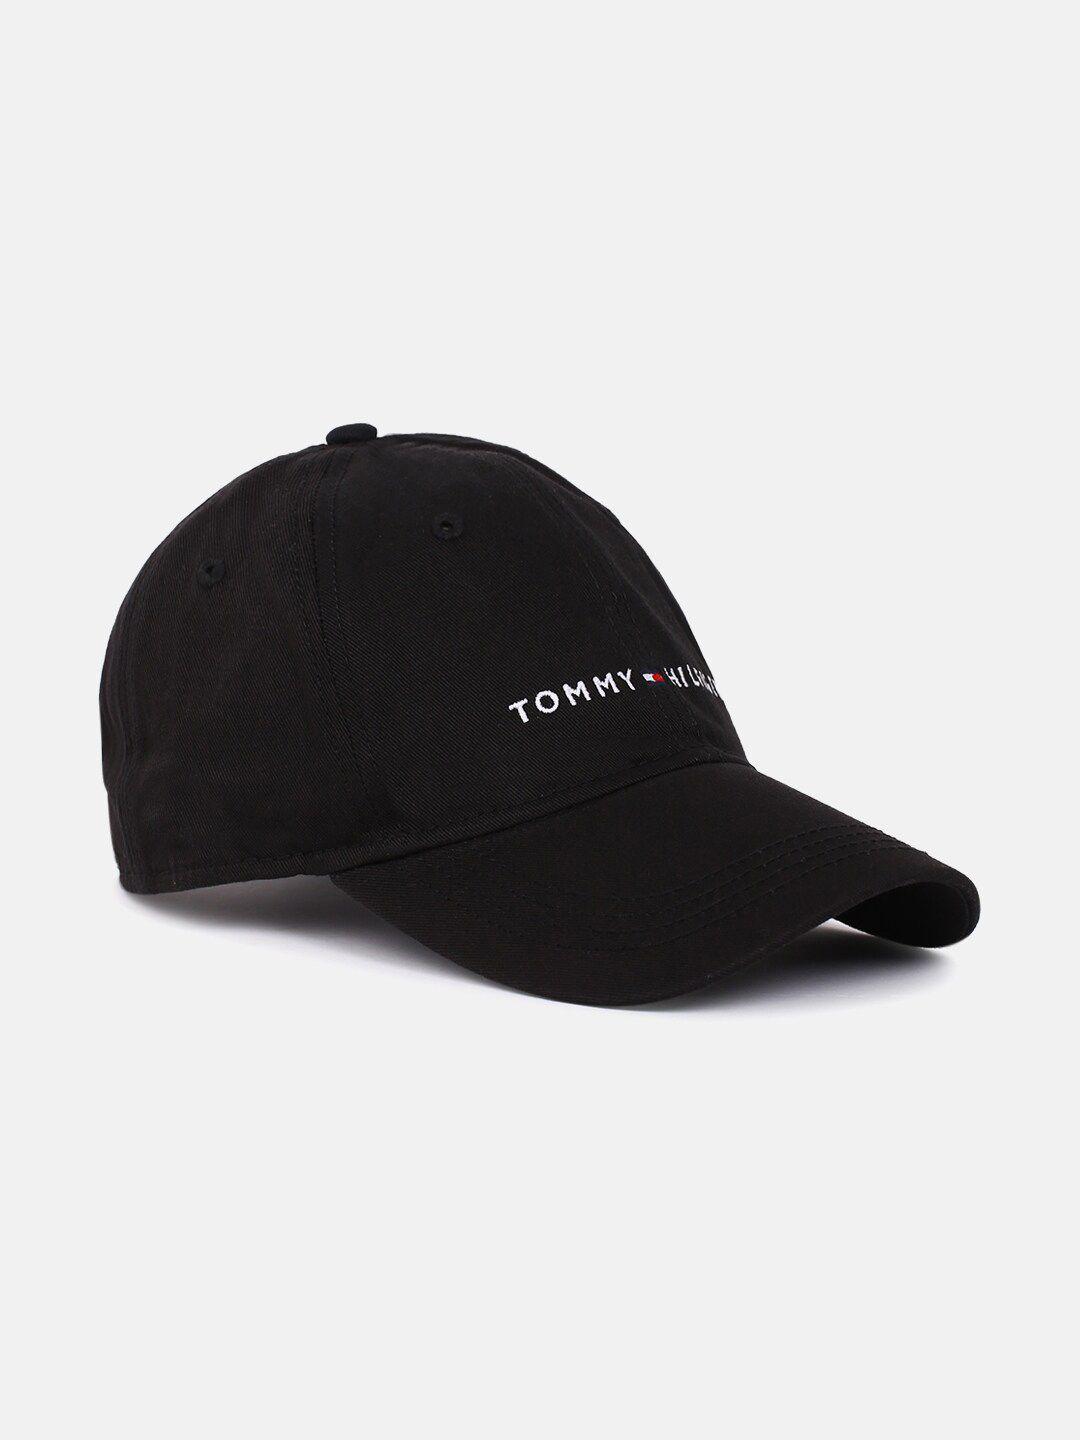 tommy-hilfiger-men-typography-embroidered-cotton-baseball-cap